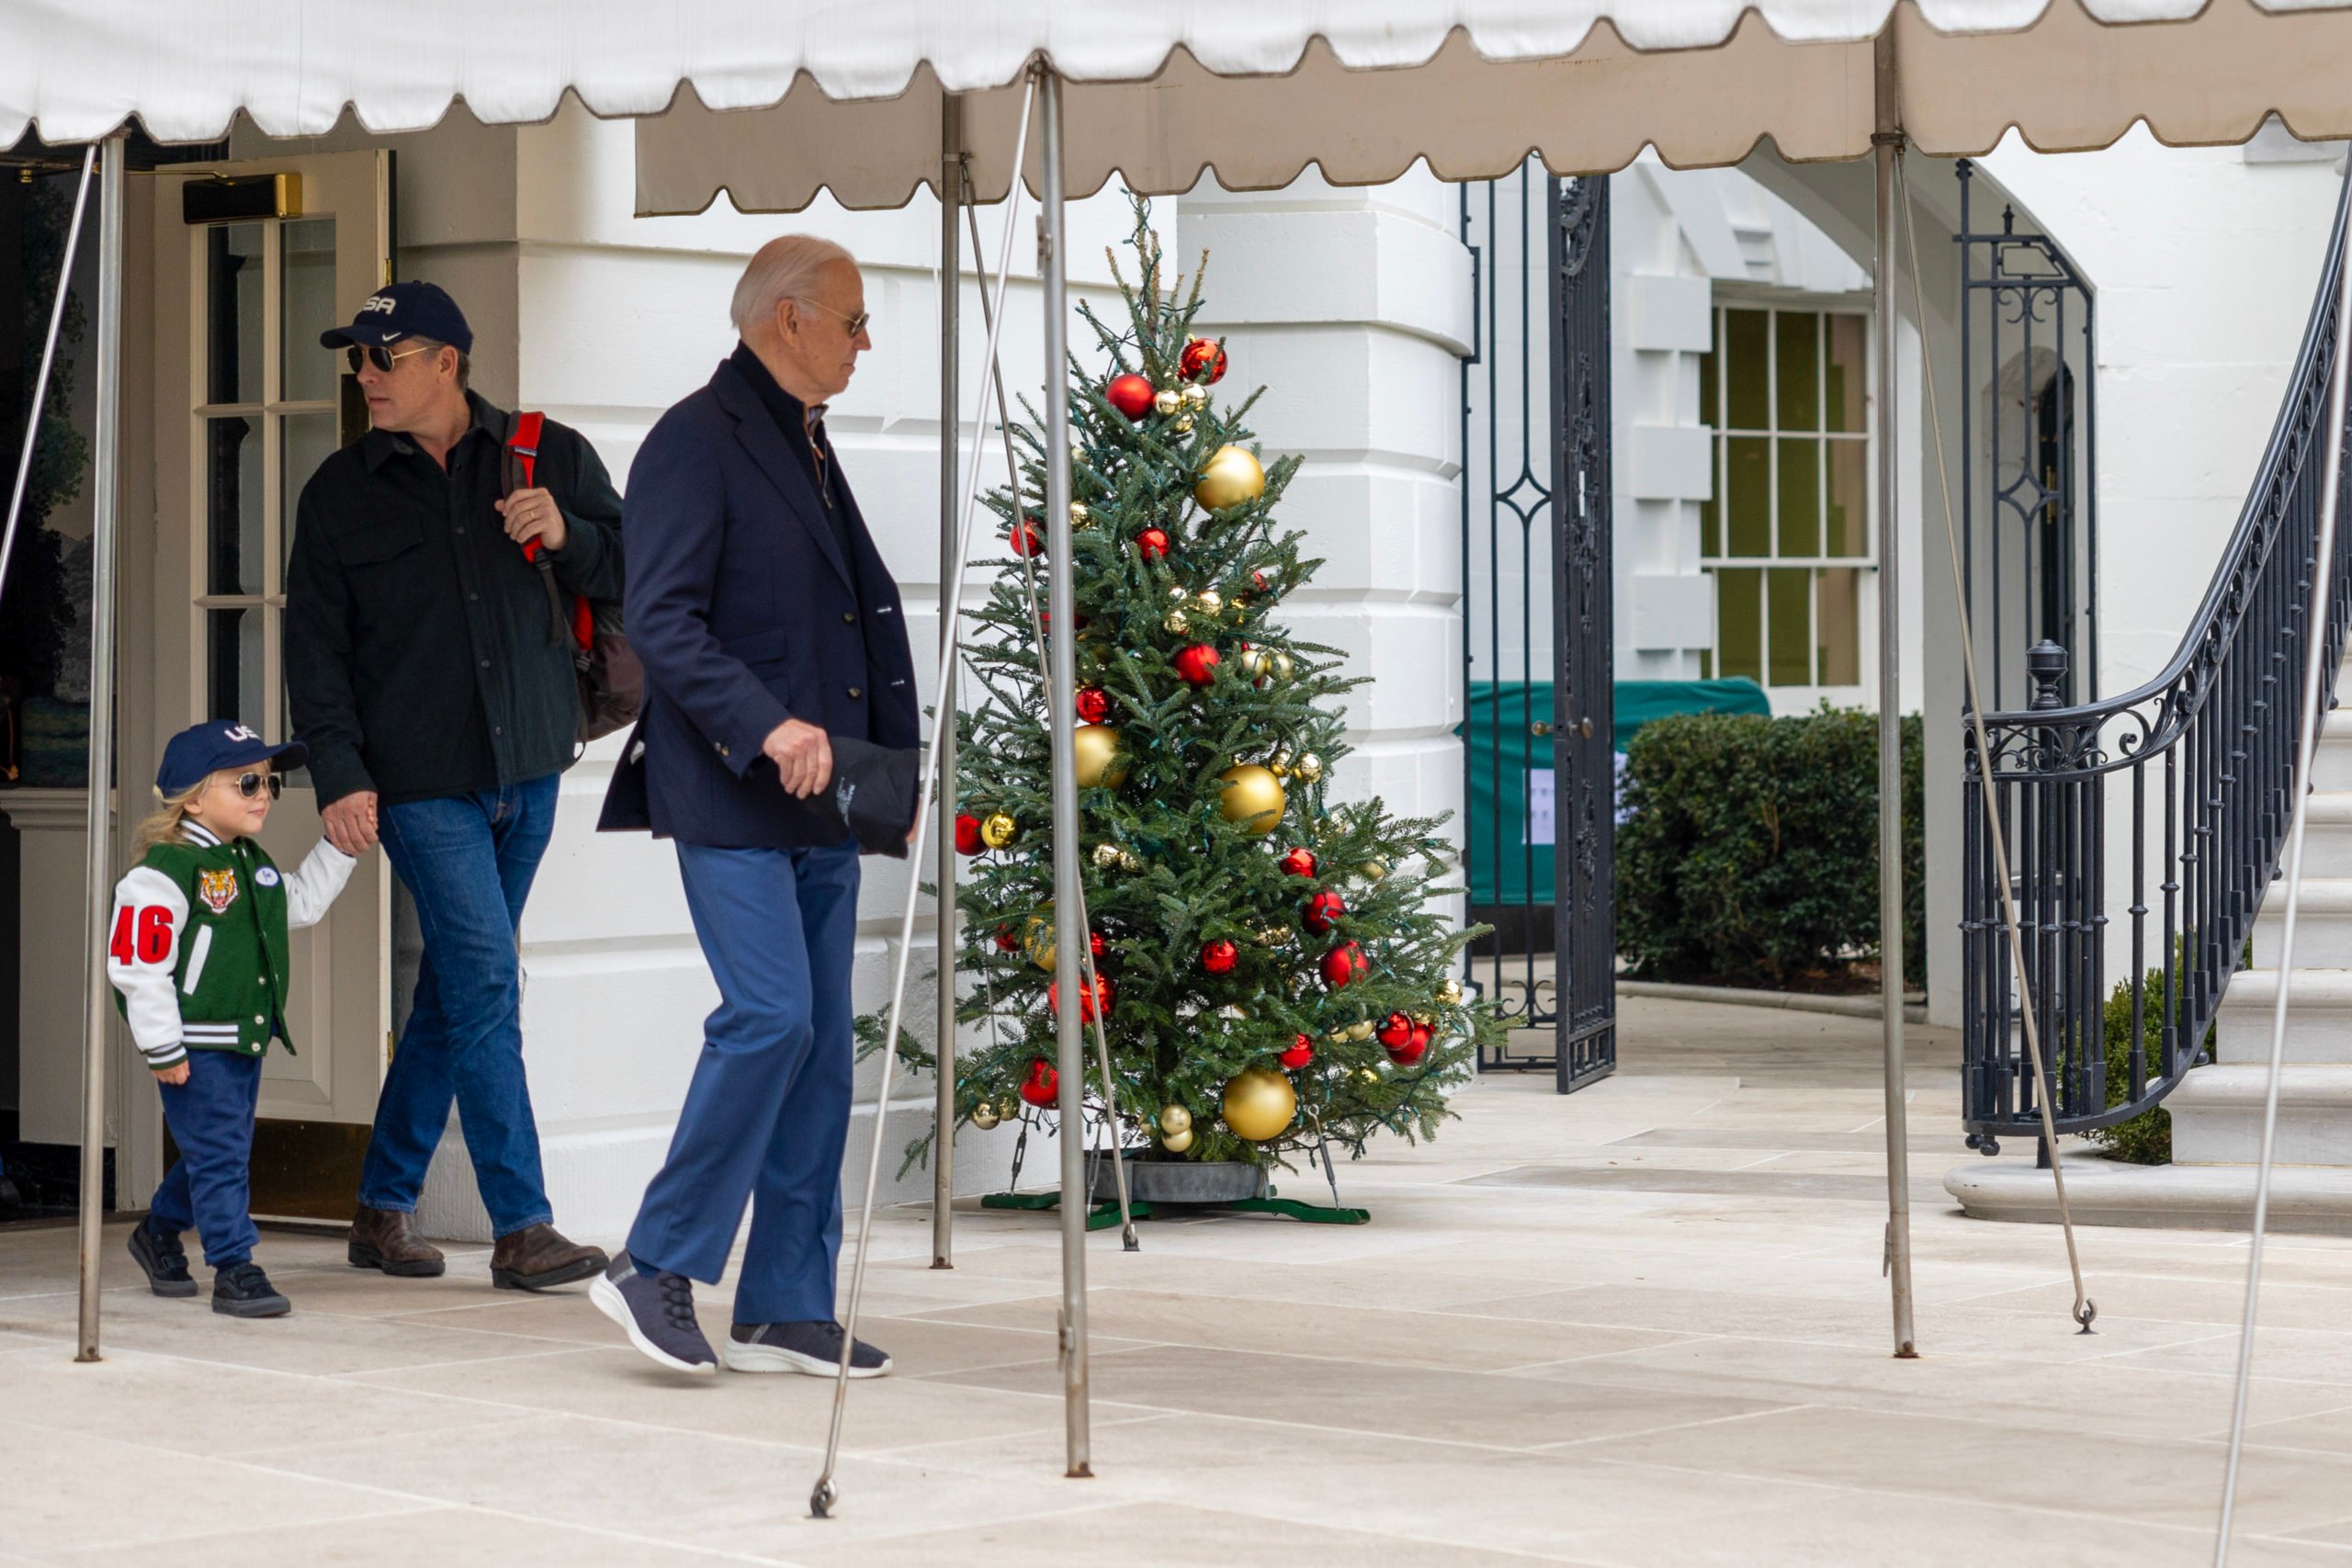 U.S. President Joe Biden walks out of the White House alongside Hunter Biden and his son Beau Biden towards Marine One on December 23, 2023 in Washington, DC. President Biden will spend the holidays with family at Camp David. (Photo by Tasos Katopodis/Getty Images)